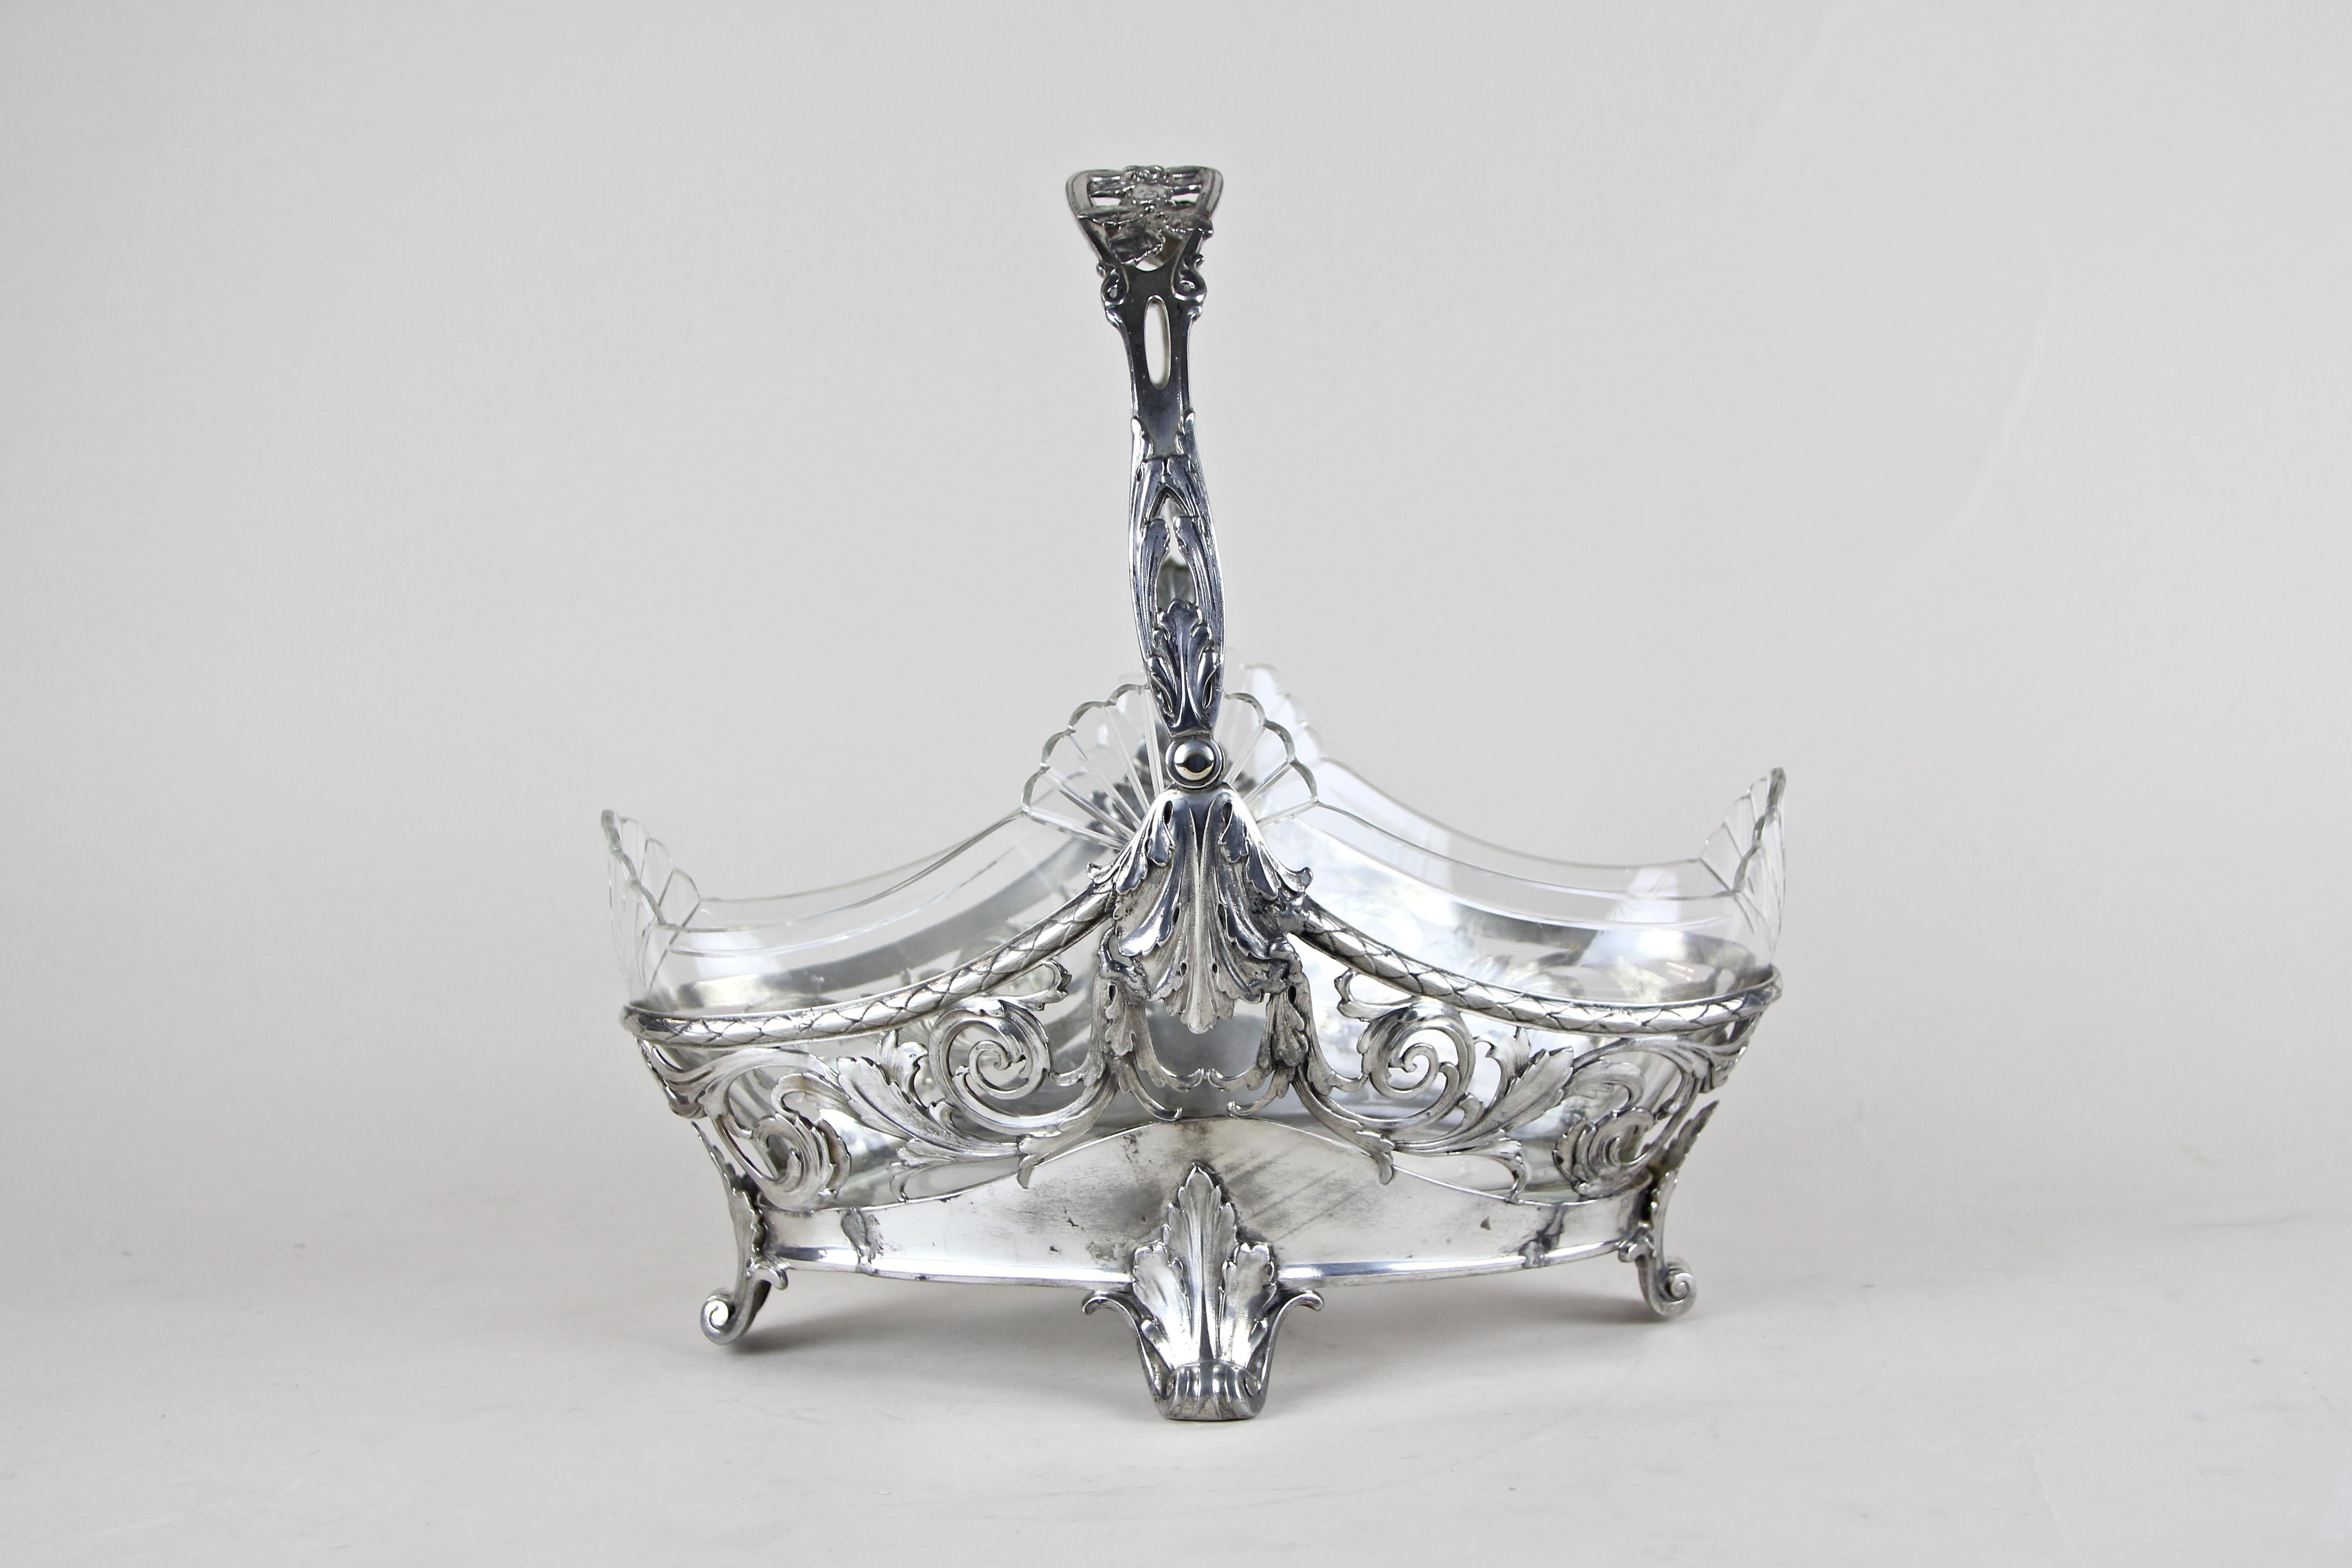 Made in Krefeld – Germany, circa 1910 by the famous company of J.P. Kayser (Kayserzinn) this beautiful Art Nouveau Centerpiece shows a fantastic open worked and silvered tin basket with an outstanding floral design. In this basket sits a beautiful